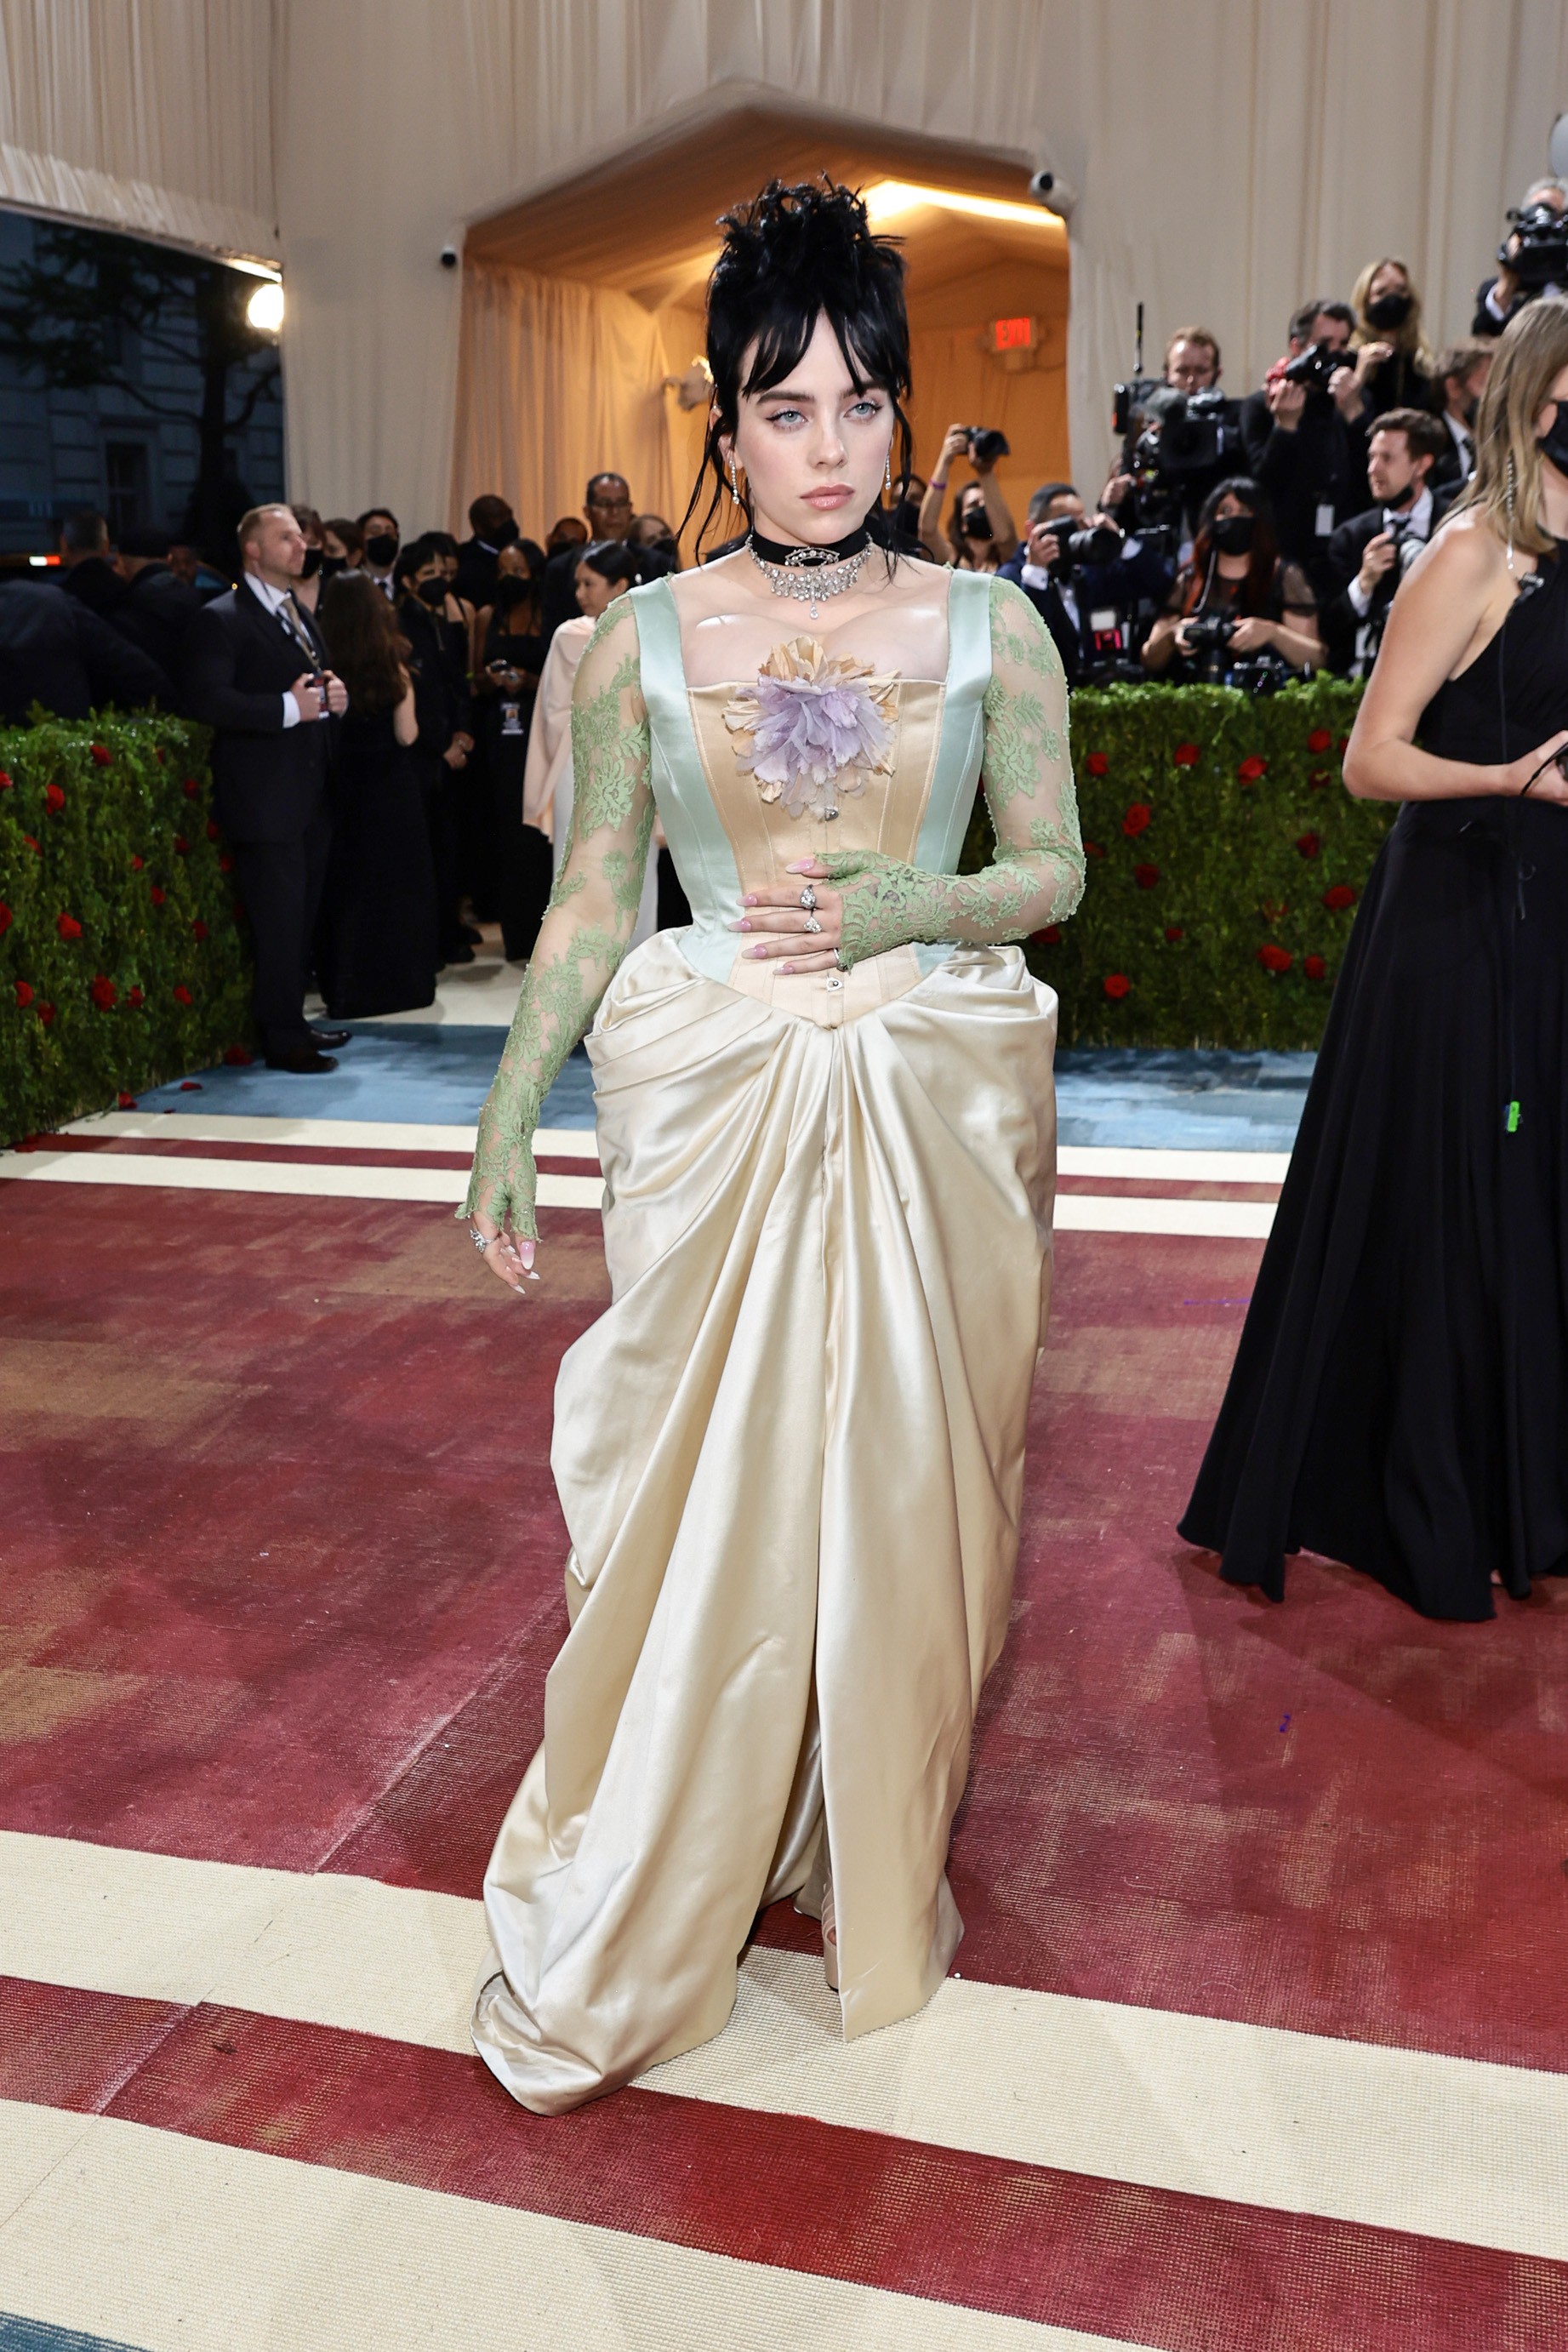 NEW YORK, NEW YORK - MAY 02: Billie Eilish attends The 2022 Met Gala Celebrating "In America: An Anthology of Fashion" at The Metropolitan Museum of Art on May 02, 2022 in New York City. (Photo by Jamie McCarthy/Getty Images) (Foto: Getty Images)